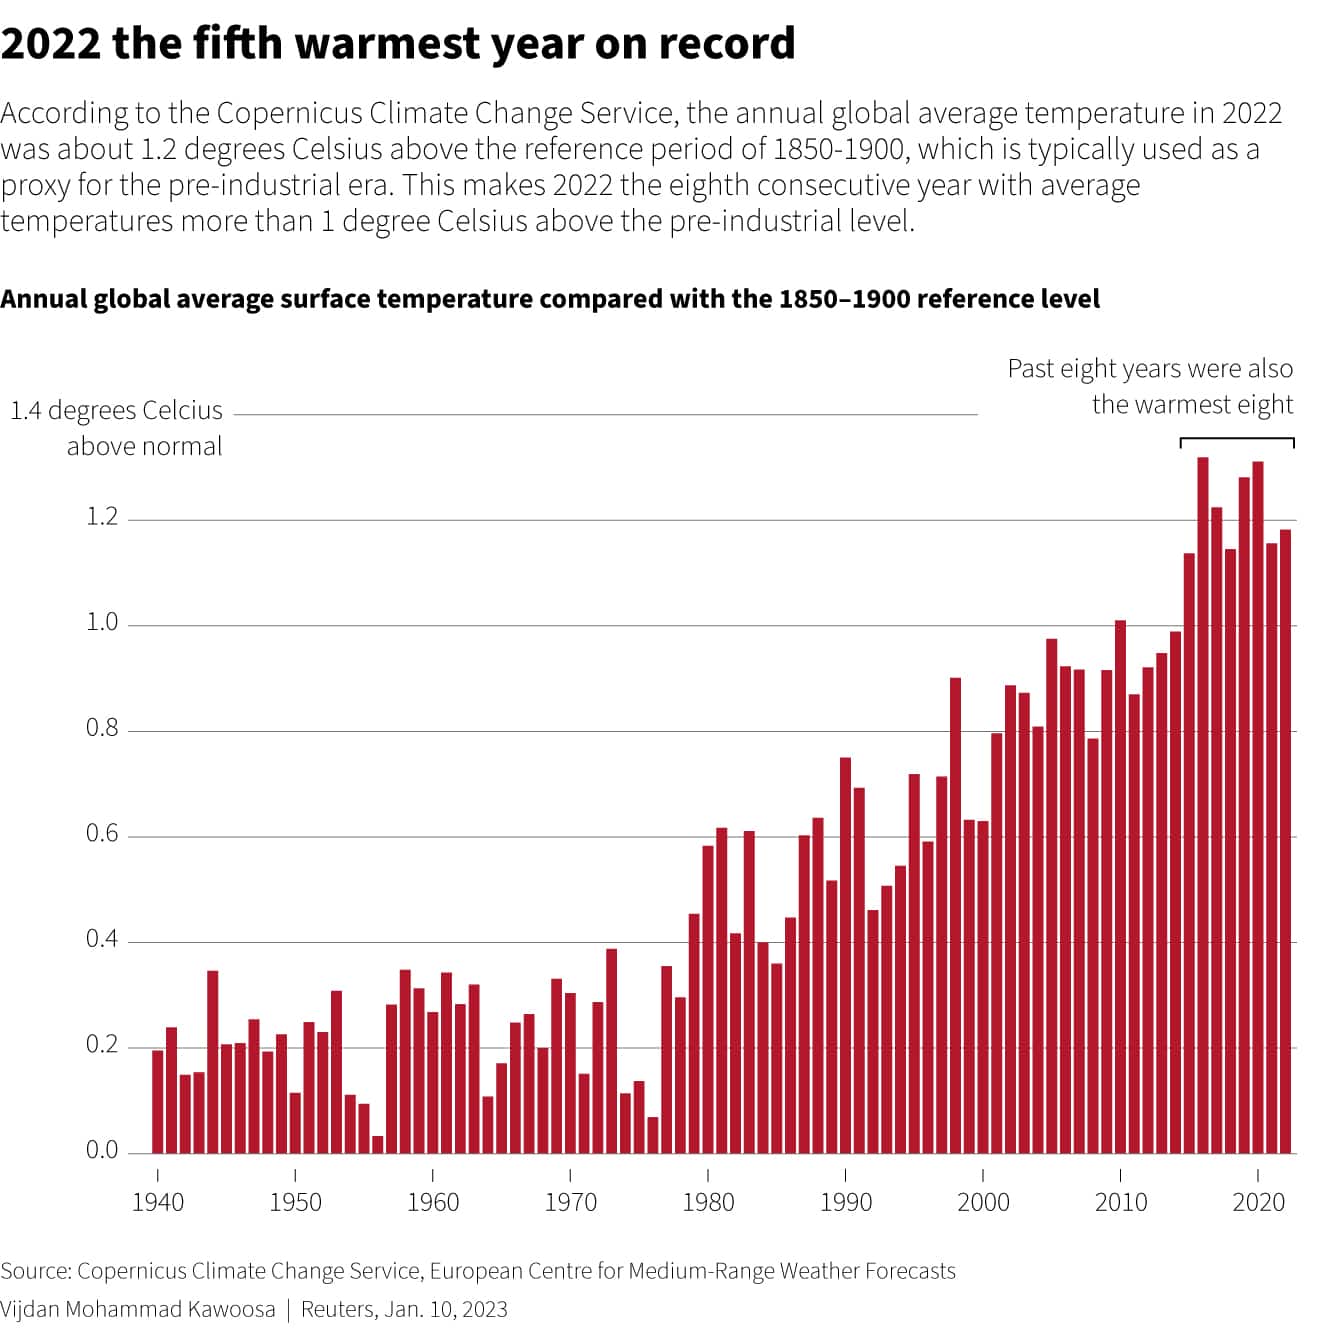 The EU's Copernicus Climate Change Service shared its findings on global climate for 2022, with the annual global mean temperature in 2022 about 1.2°C higher than the reference period of 1850-1900